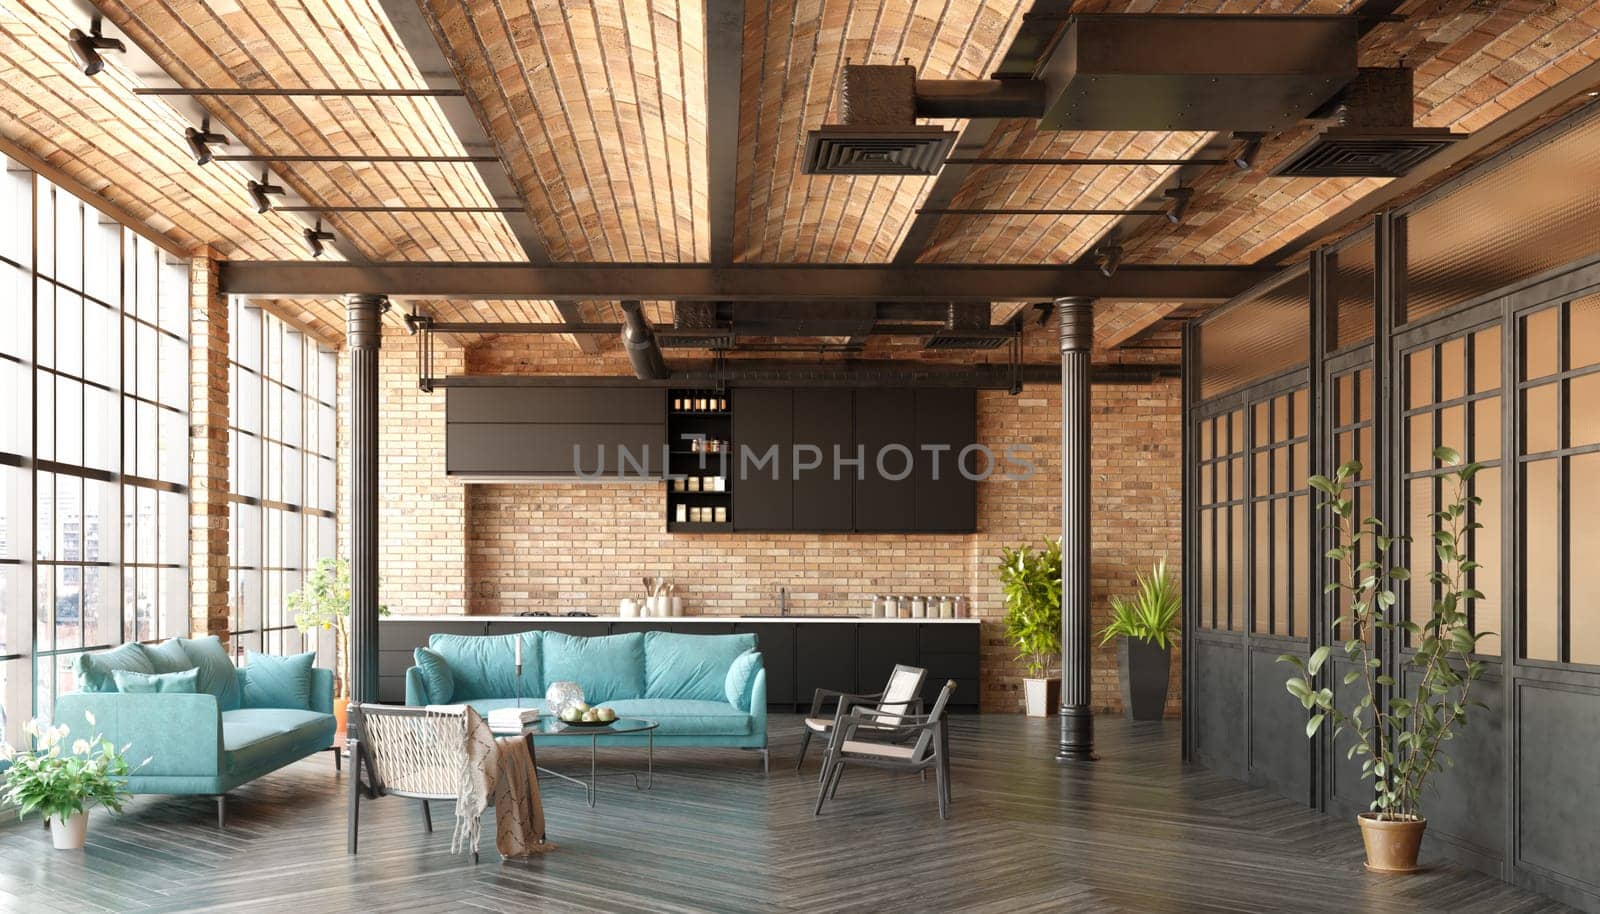 A modern loft living room with a couch, a kitchen. The room has a minimalist and clean design, with a focus on functionality and comfort. 3d render